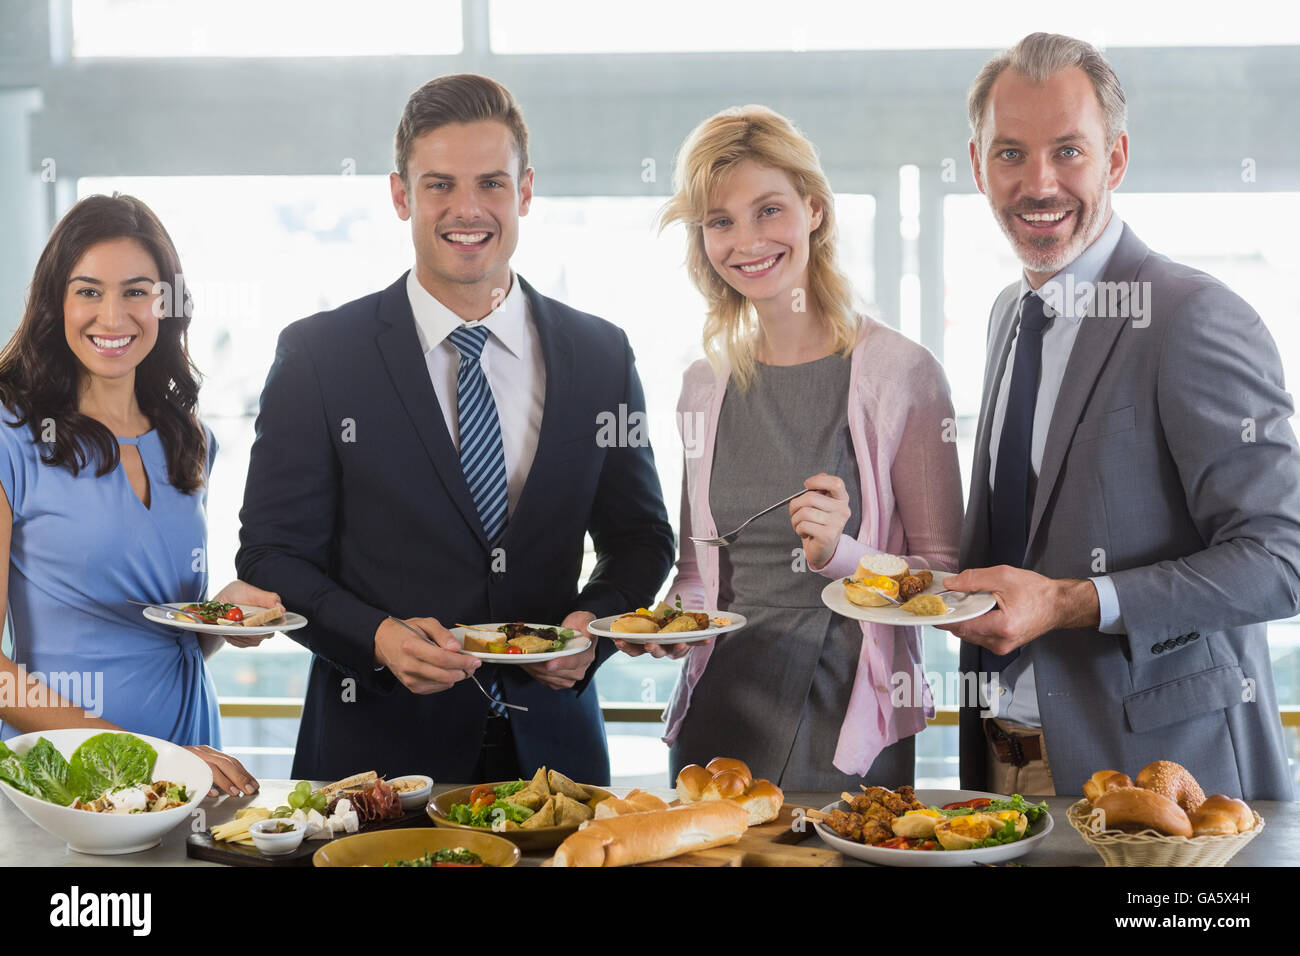 Portrait of business colleagues serving themselves at buffet lunch Stock Photo